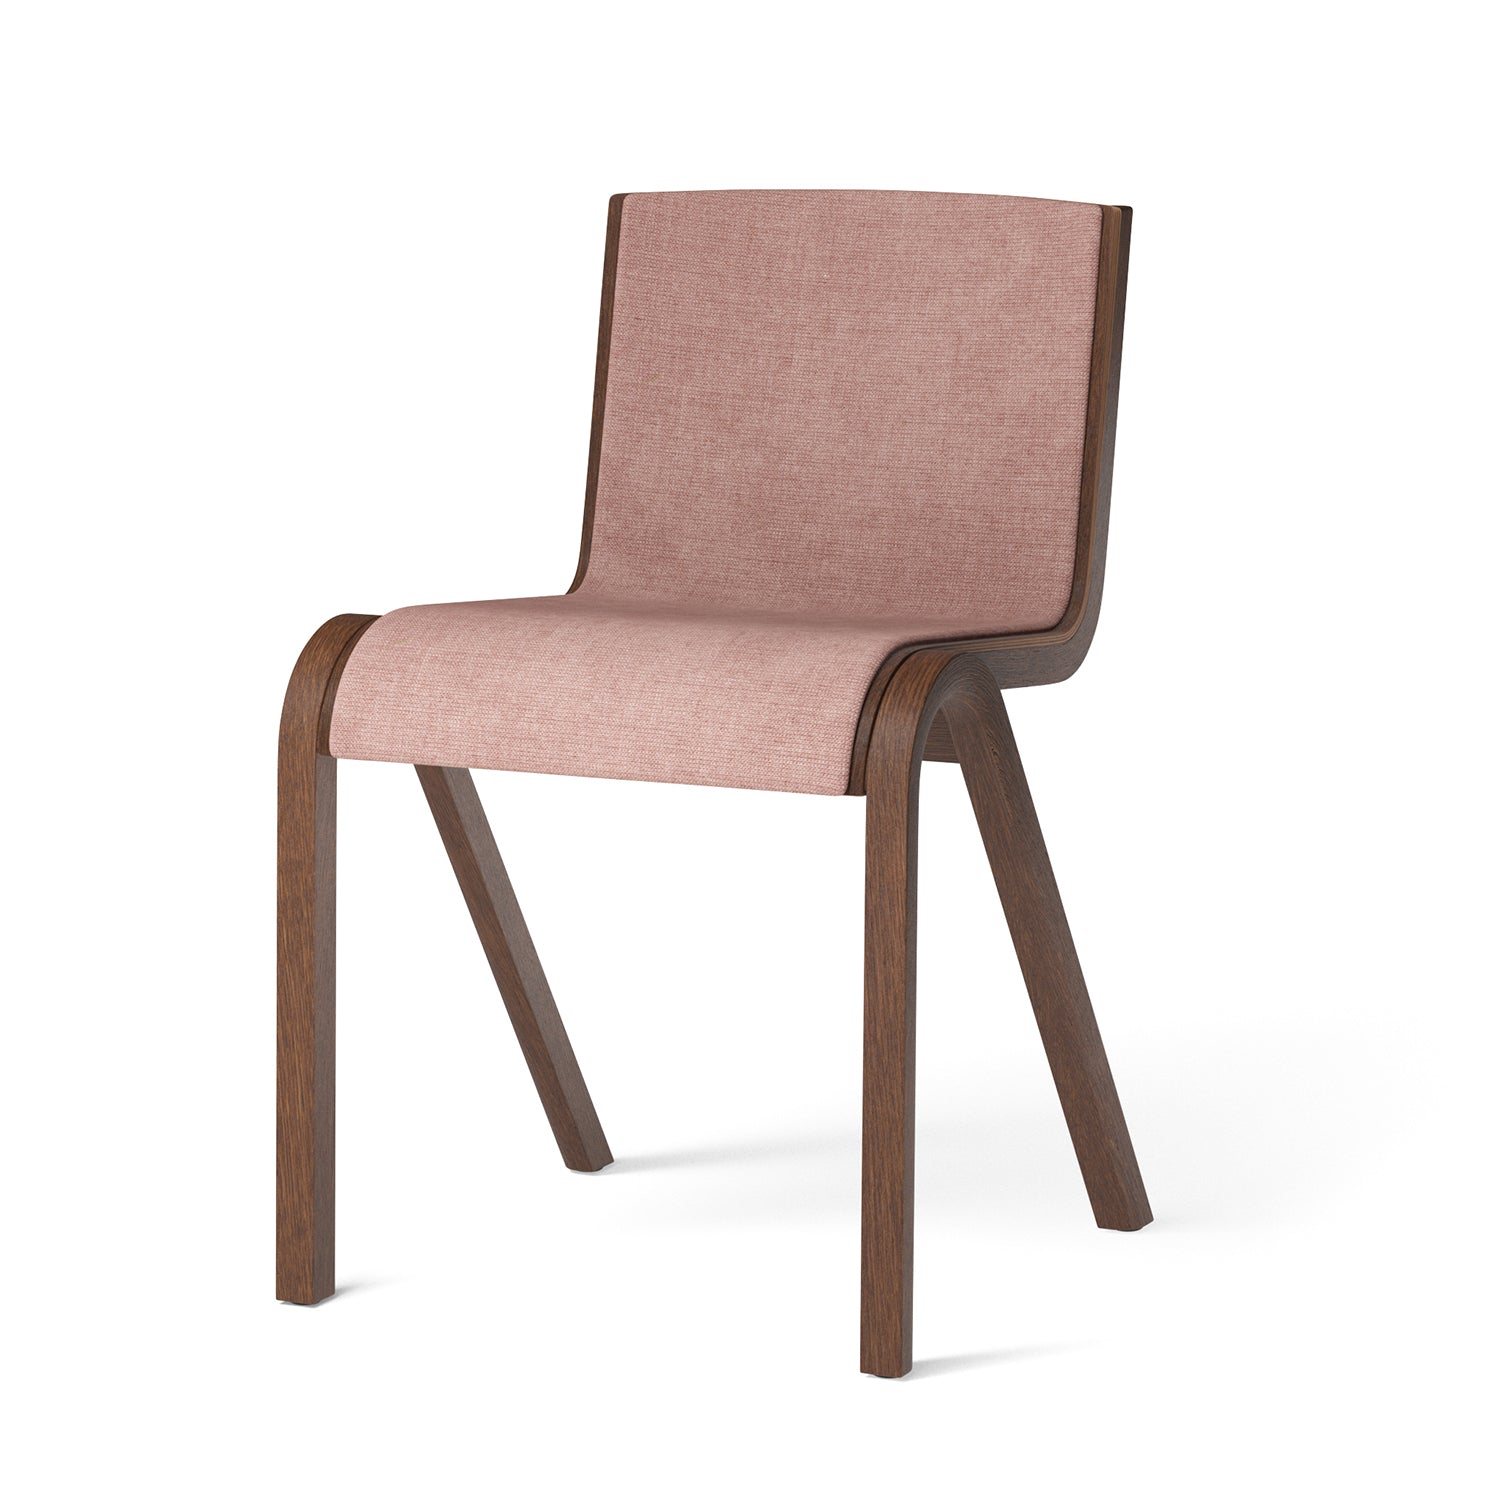 Ready Dining Chair Fully Upholstered - The Design Choice